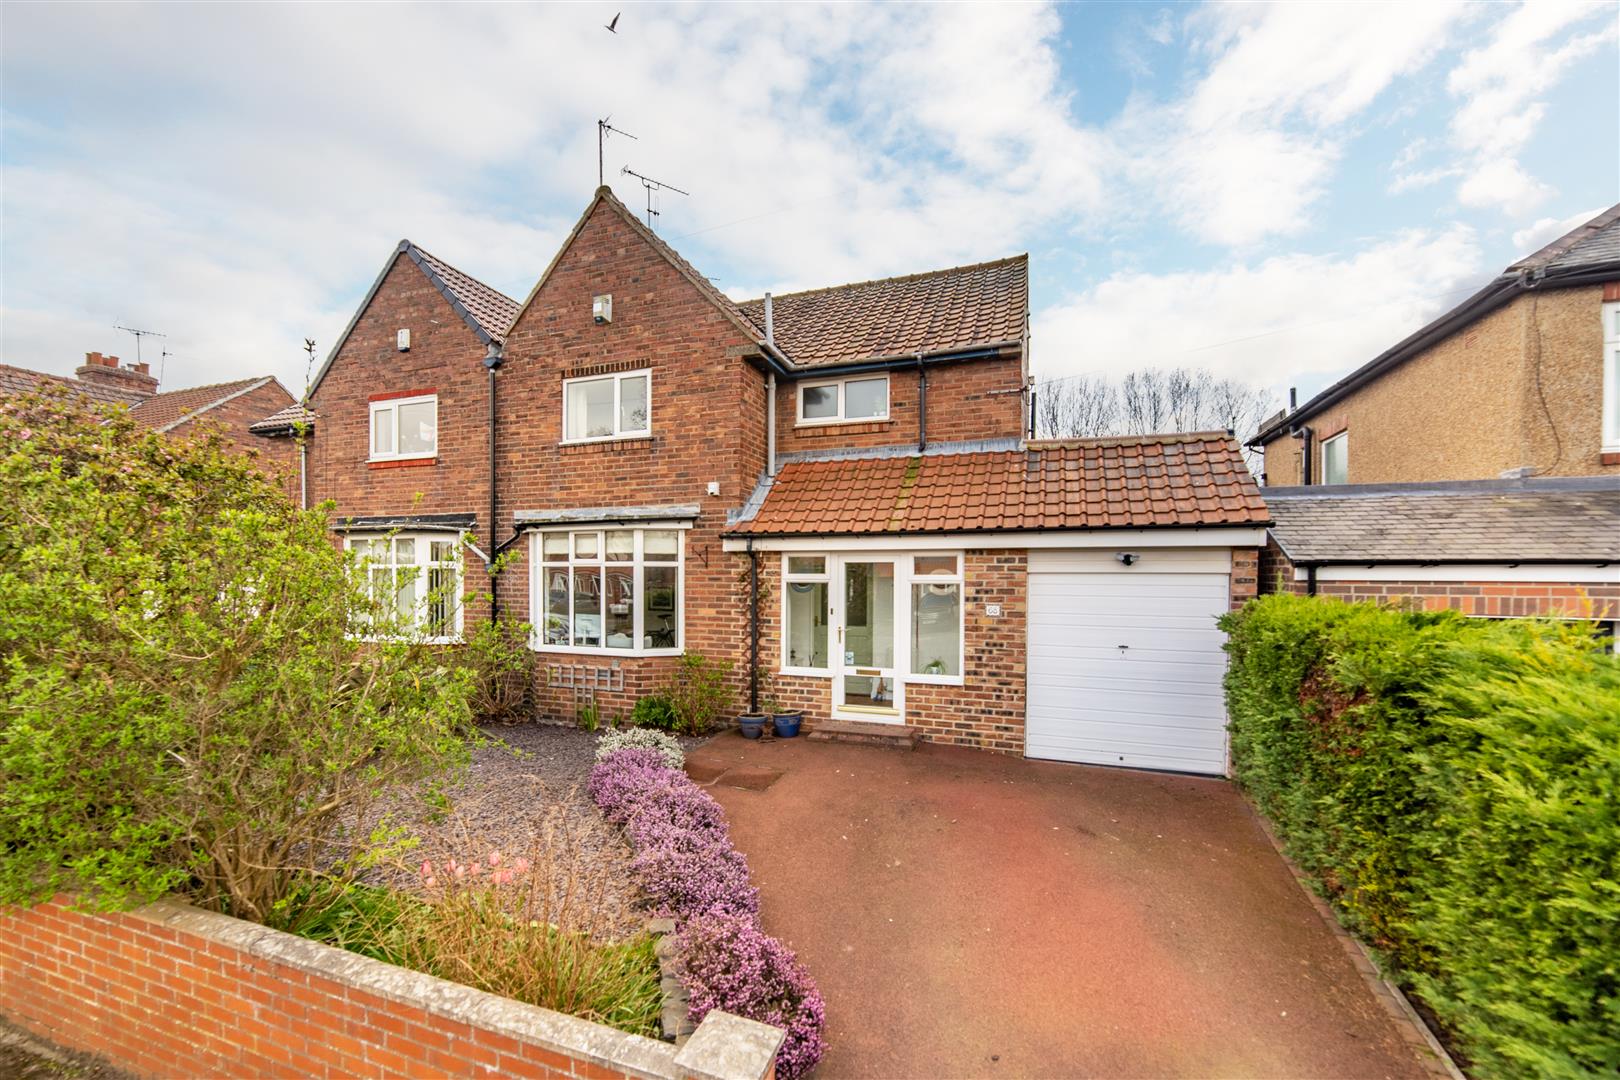 3 bed semi-detached house for sale in Hollywood Avenue, Gosforth, NE3 